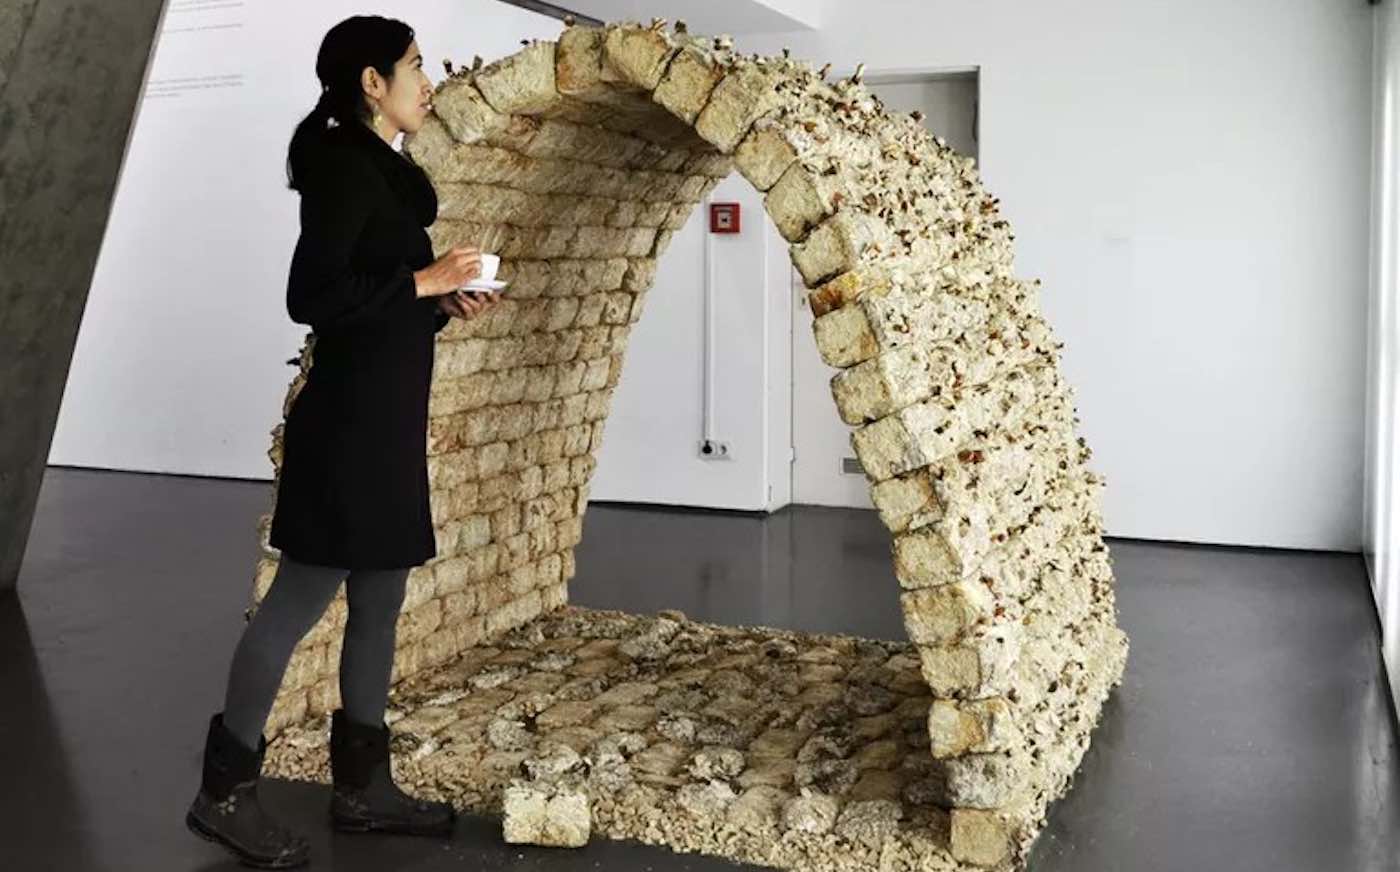 Buildings made with fungi could live, grow — and then biodegrade